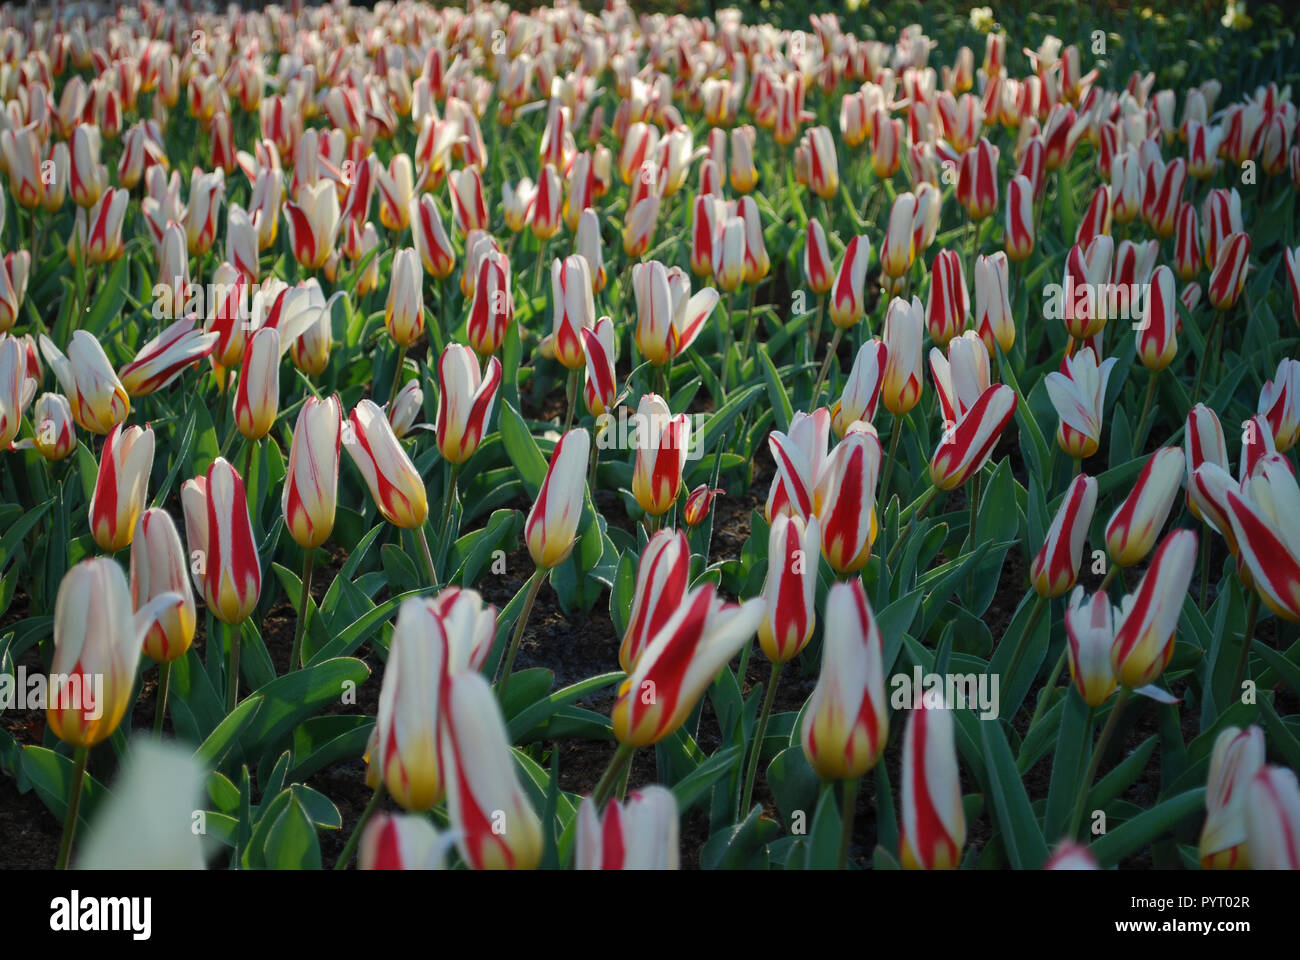 Tulips 'The First' (Tulip) Kaufmanniana Group grown in the park.  Spring time in Netherlands. Stock Photo